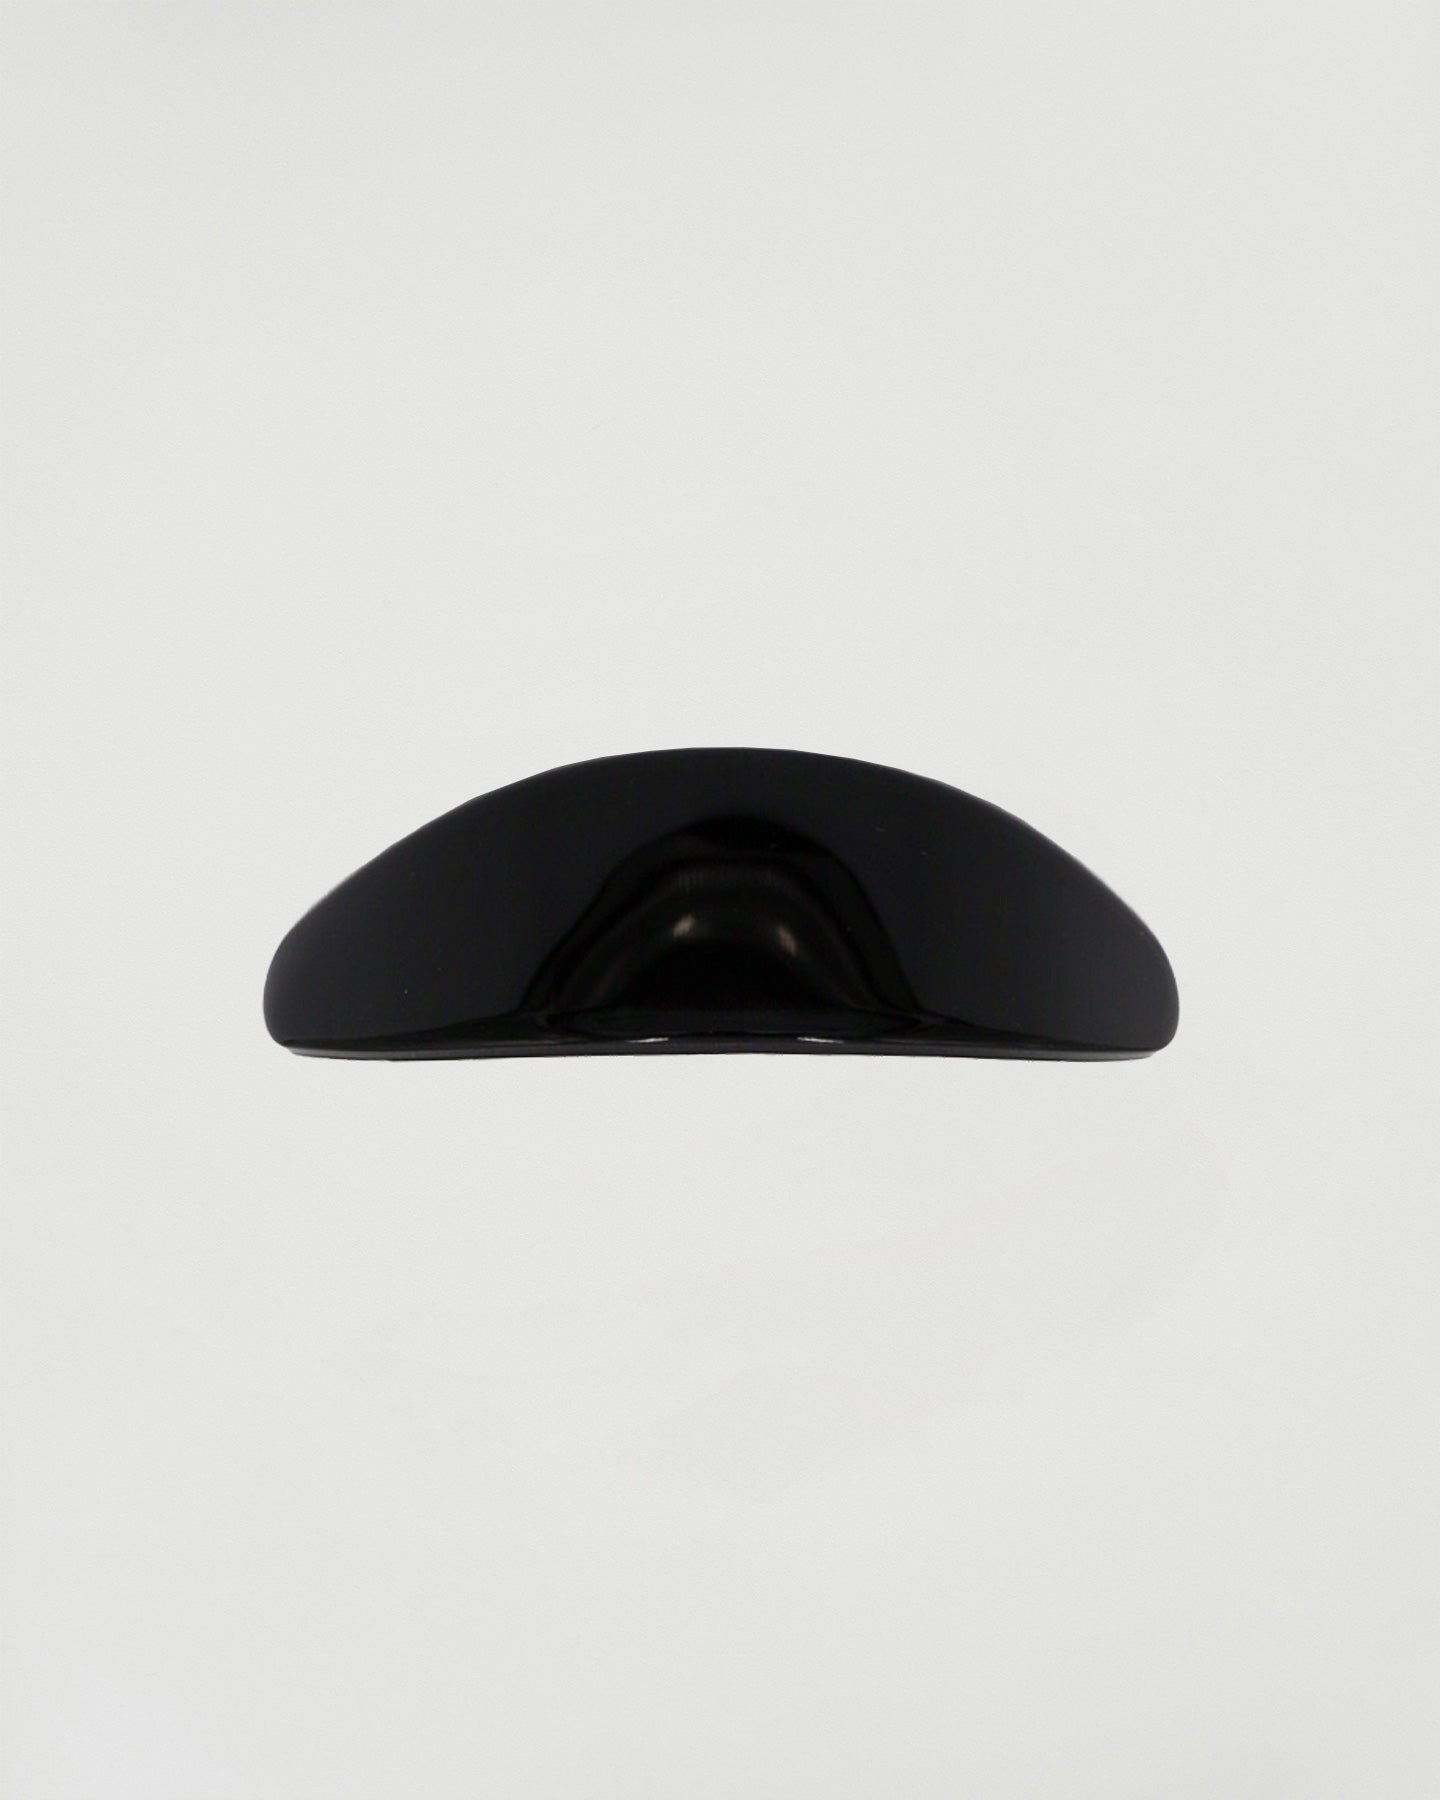 Oval curved hair barrette, Black